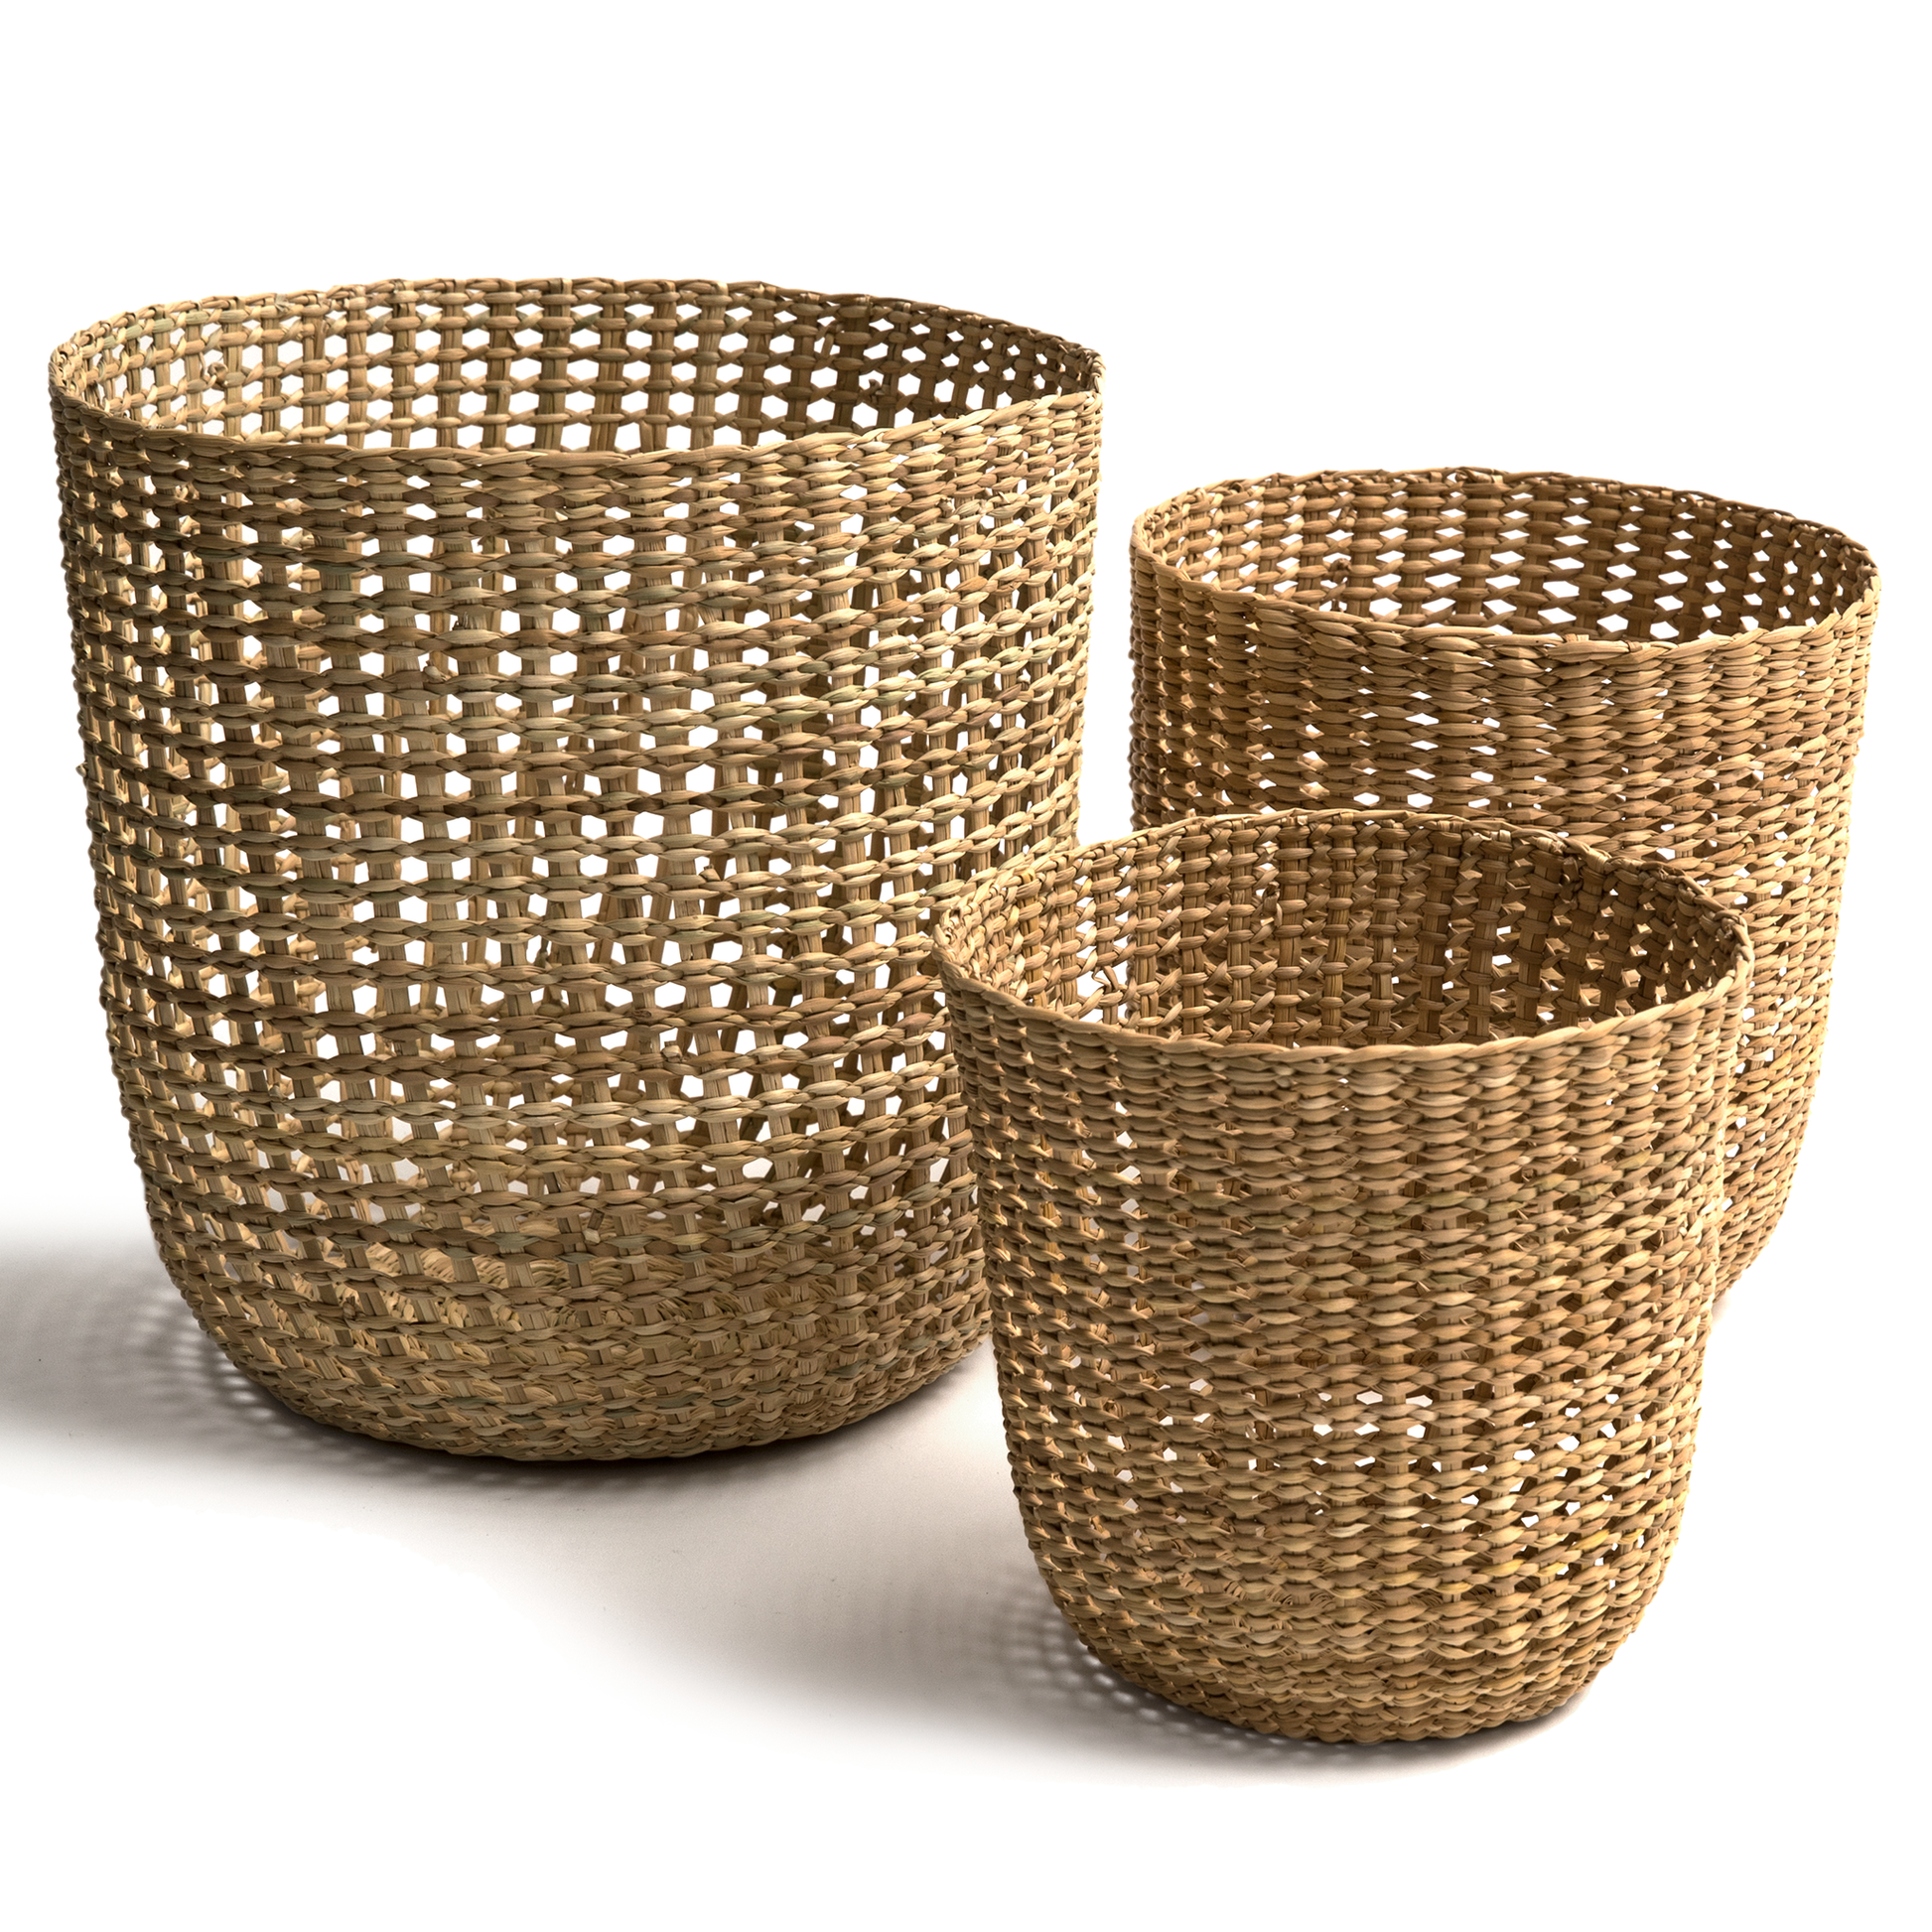 intiearth nesting baskets handwoven junco reed natural open weave